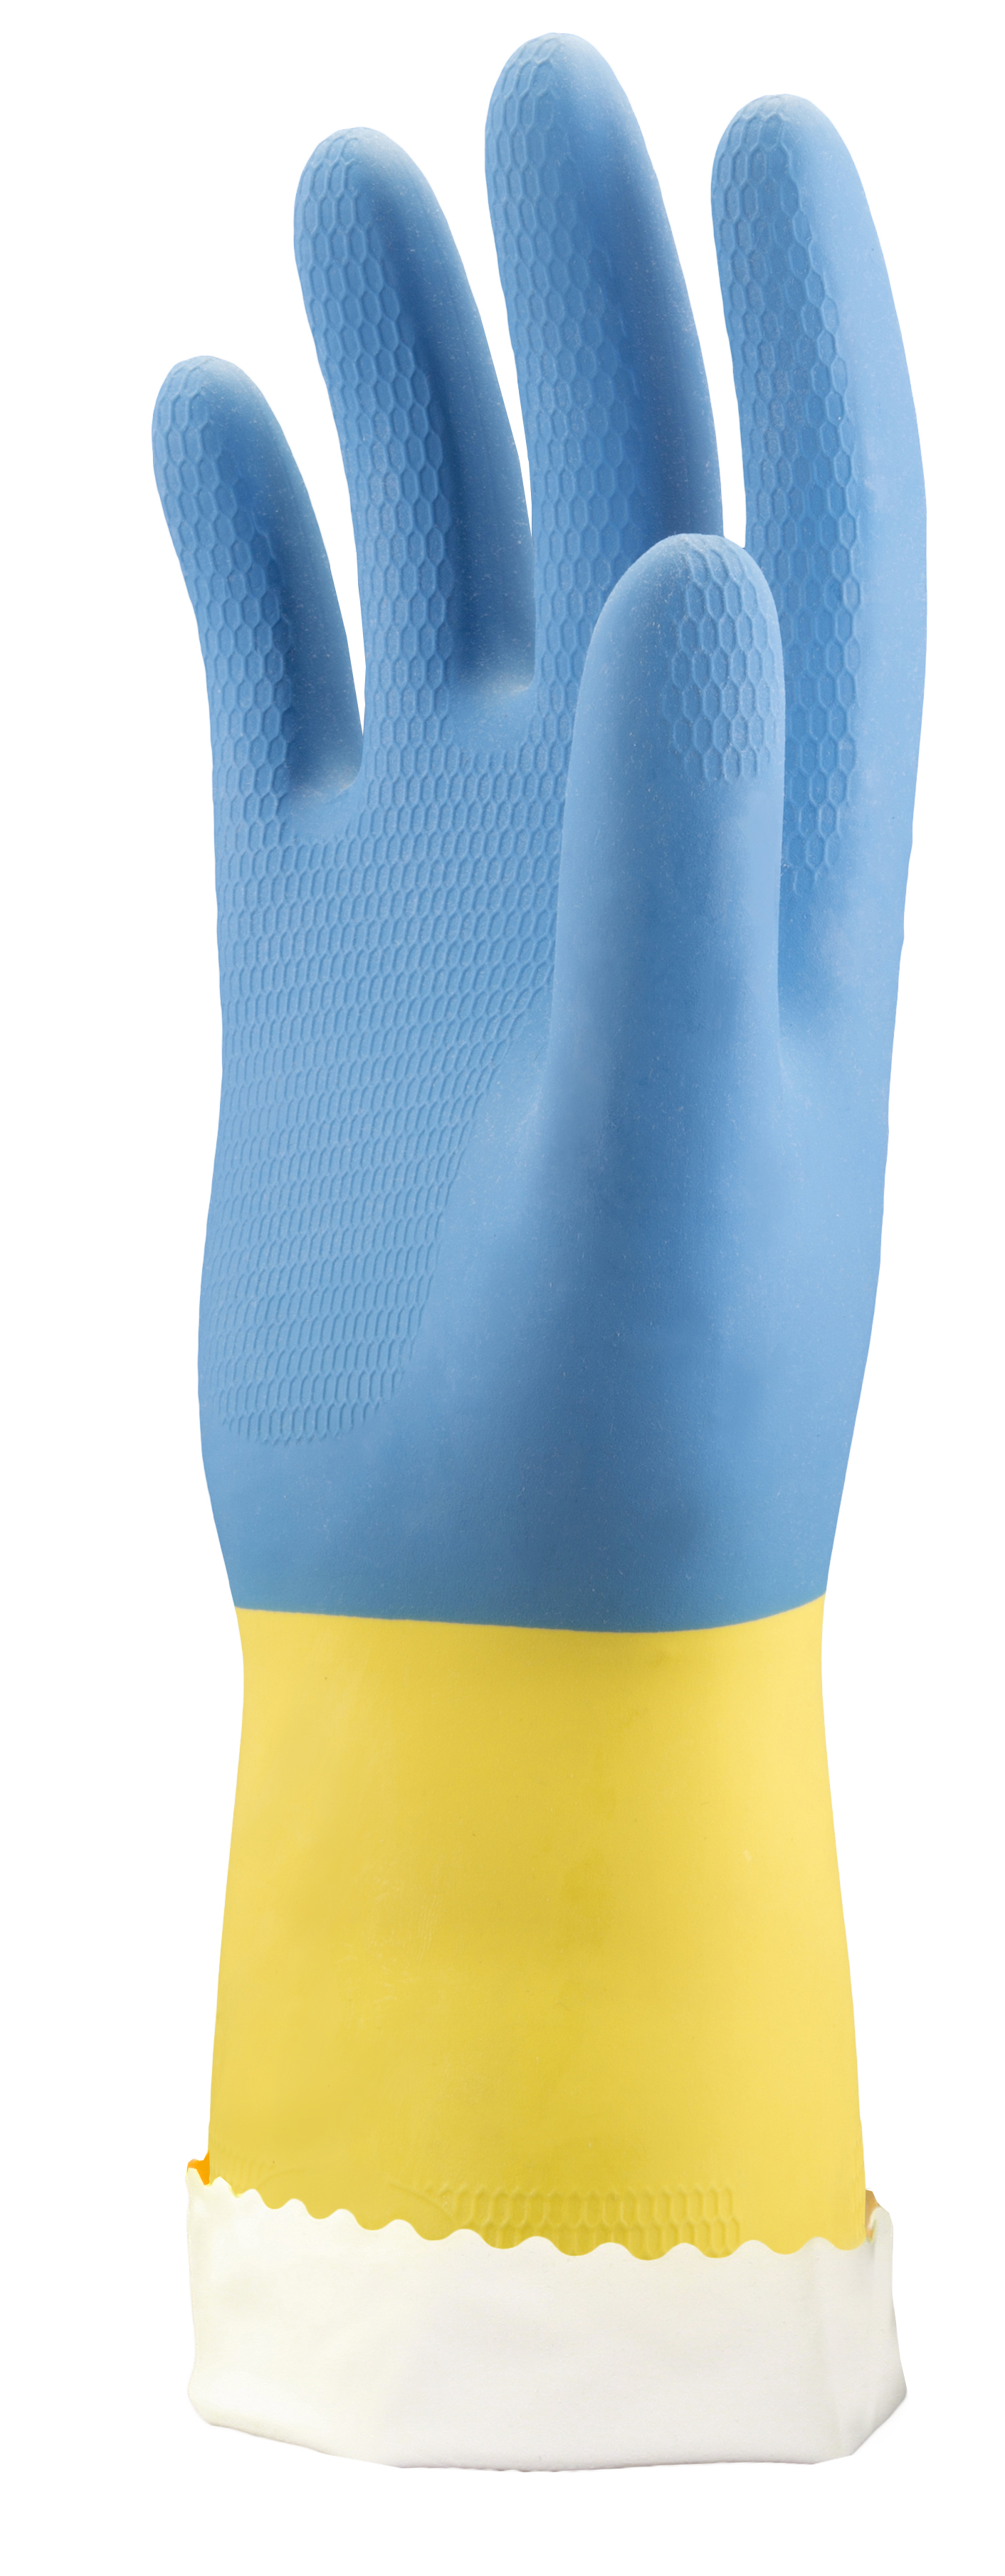 Stauffer Glove & Safety | Stauffer Glove & Safety 224D - Neoprene over  Latex, Flocked Lined, 28 mil, Honeycomb Grip